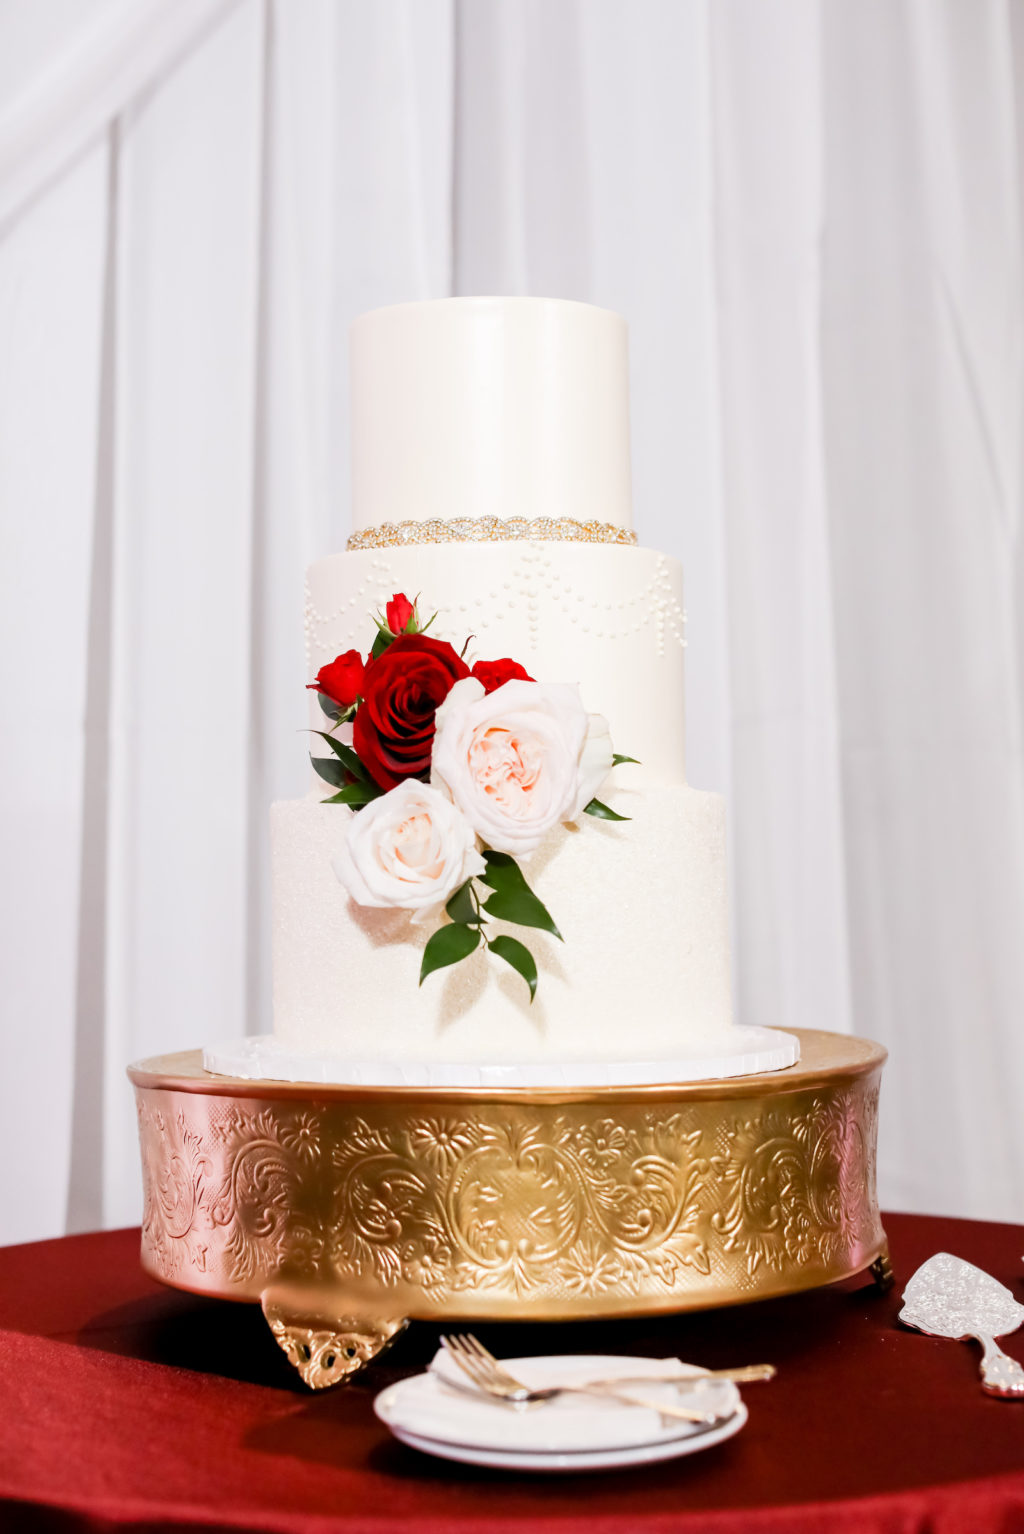 White Three Tier Wedding Cake on Gold Cake Stand, Blush Pink and Red Roses Arrangement | Tampa Bay Wedding Photographer Lifelong Photography Studios | Wedding Baker The Artistic Whisk